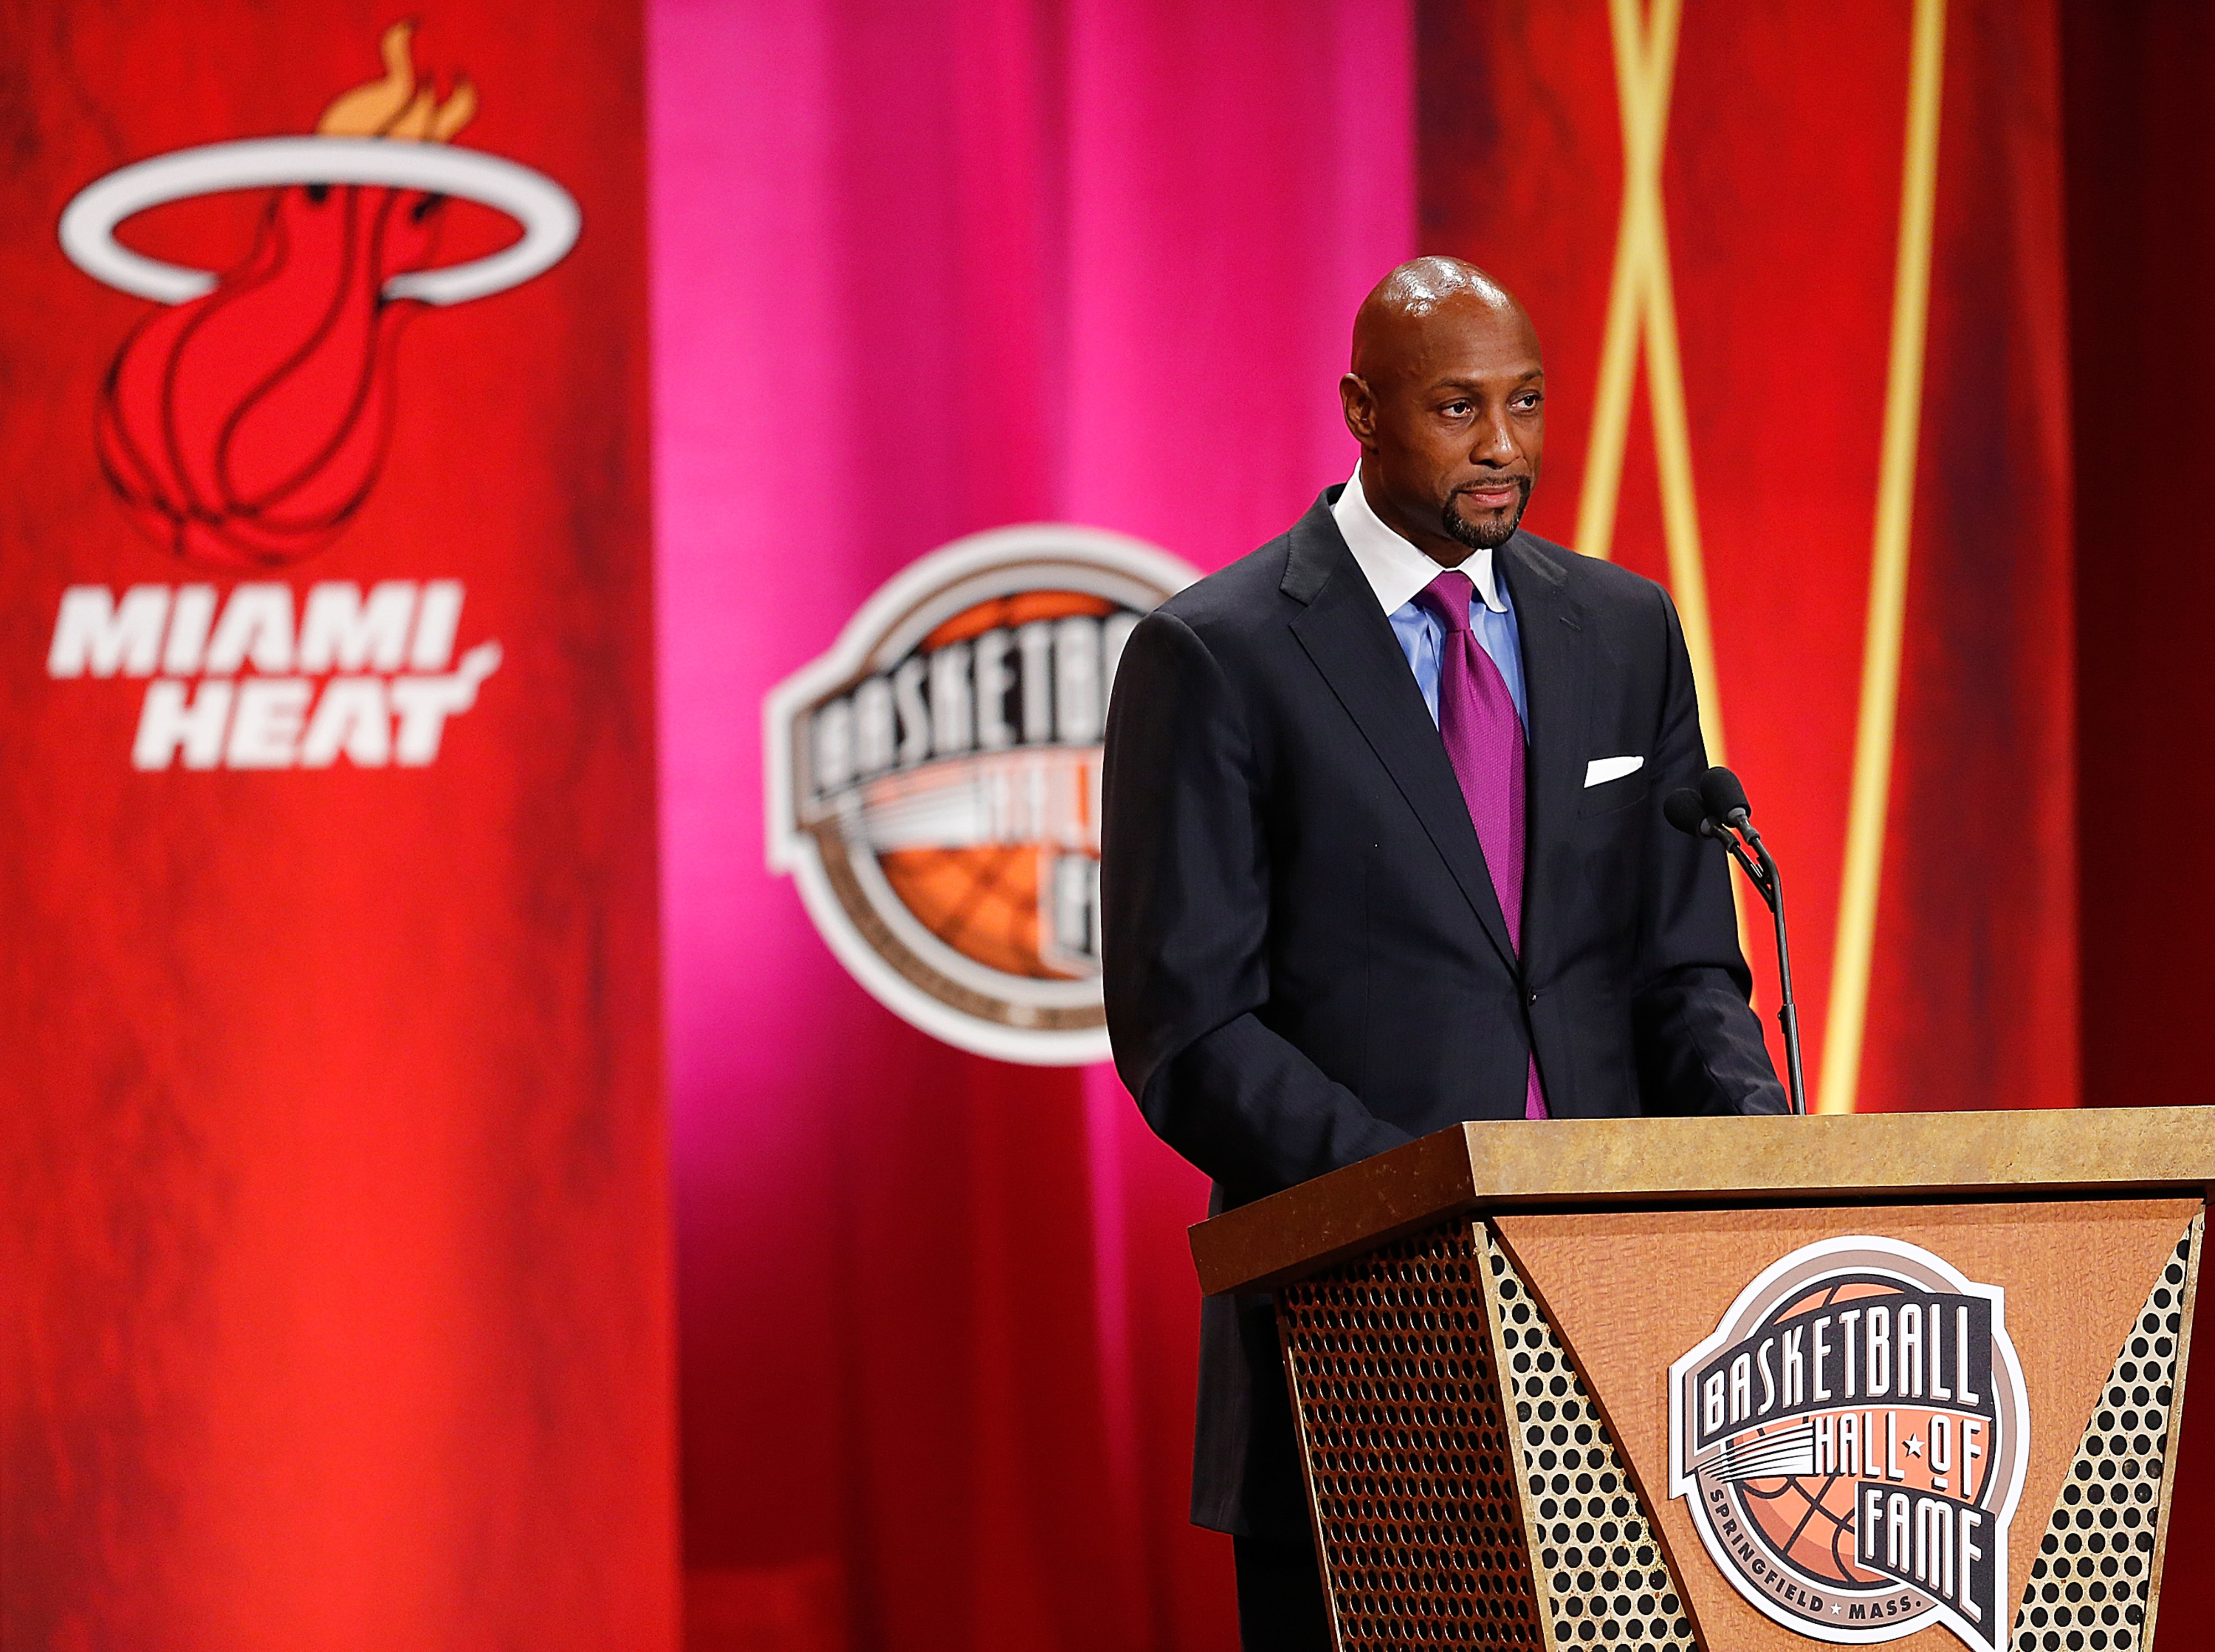 Would a player like Alonzo Mourning be helped or hurt by by an NBA-only Hall of Fame?